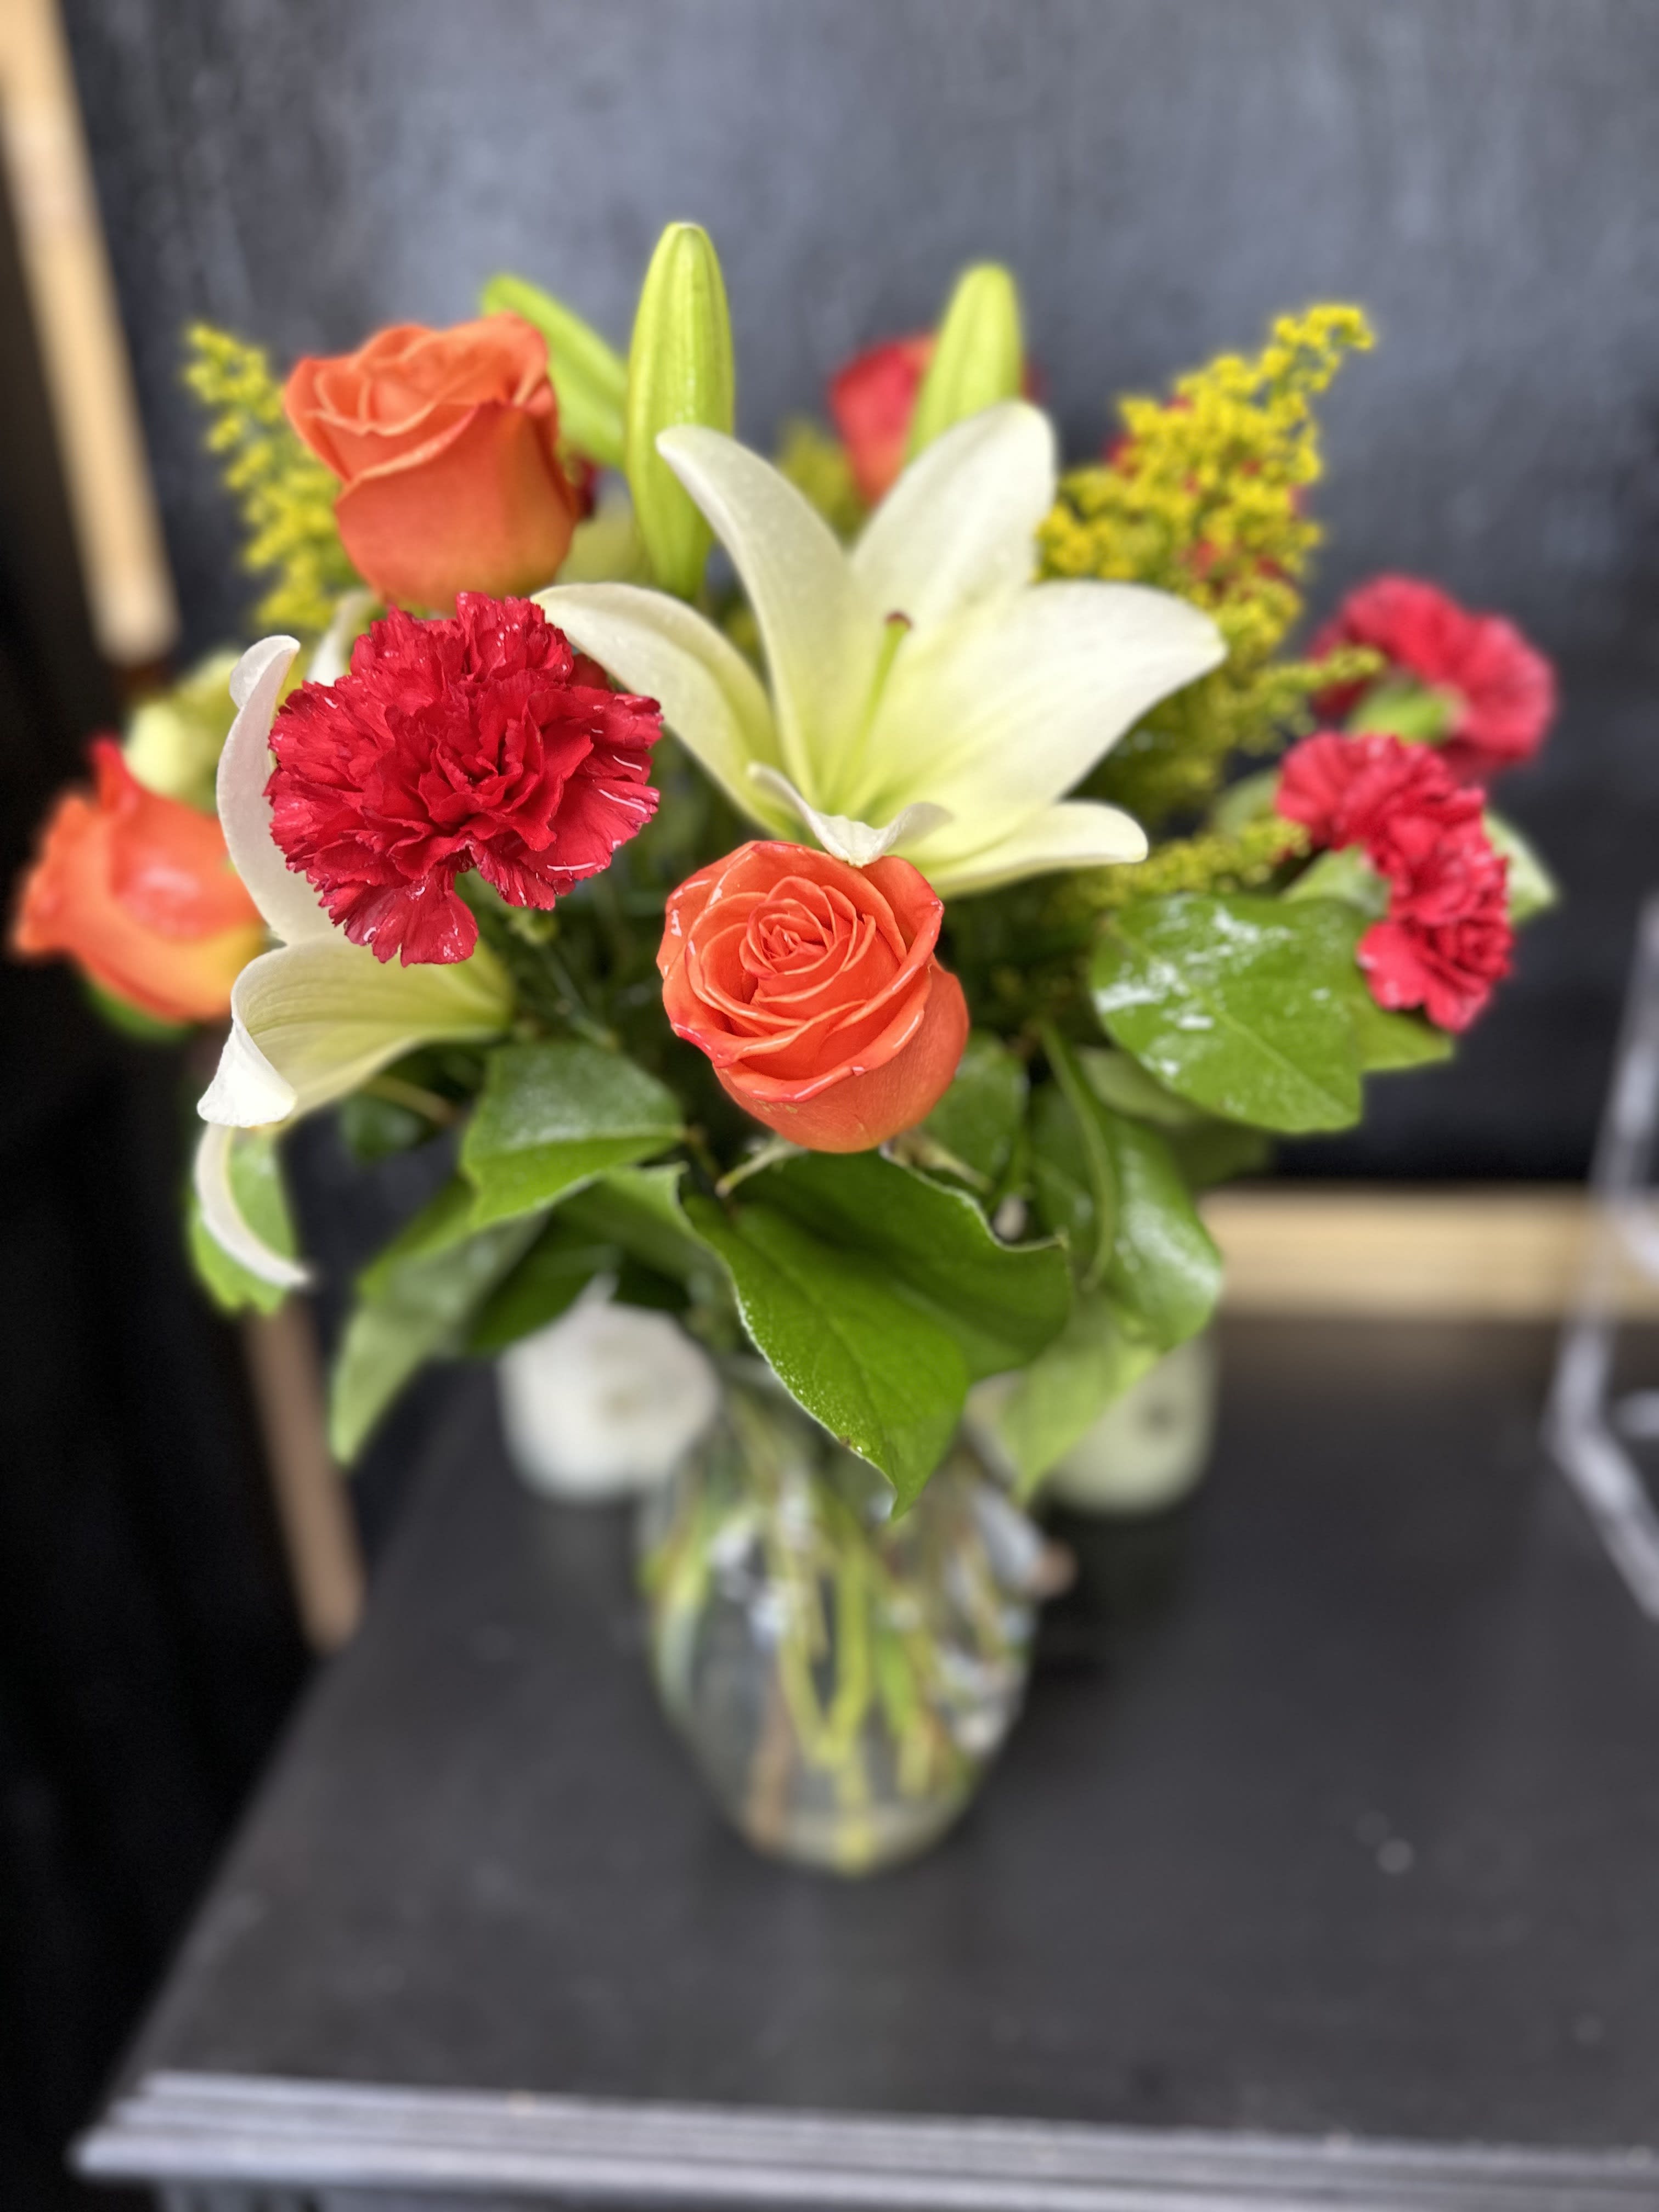 Sunset Sky - Add a bright touch to any room with a fiery mix of yellow, orange and red flowers – including roses and lilies – that’s guaranteed to warm up someone’s day. A bright floral mix that’s as pretty as a summer sunset.